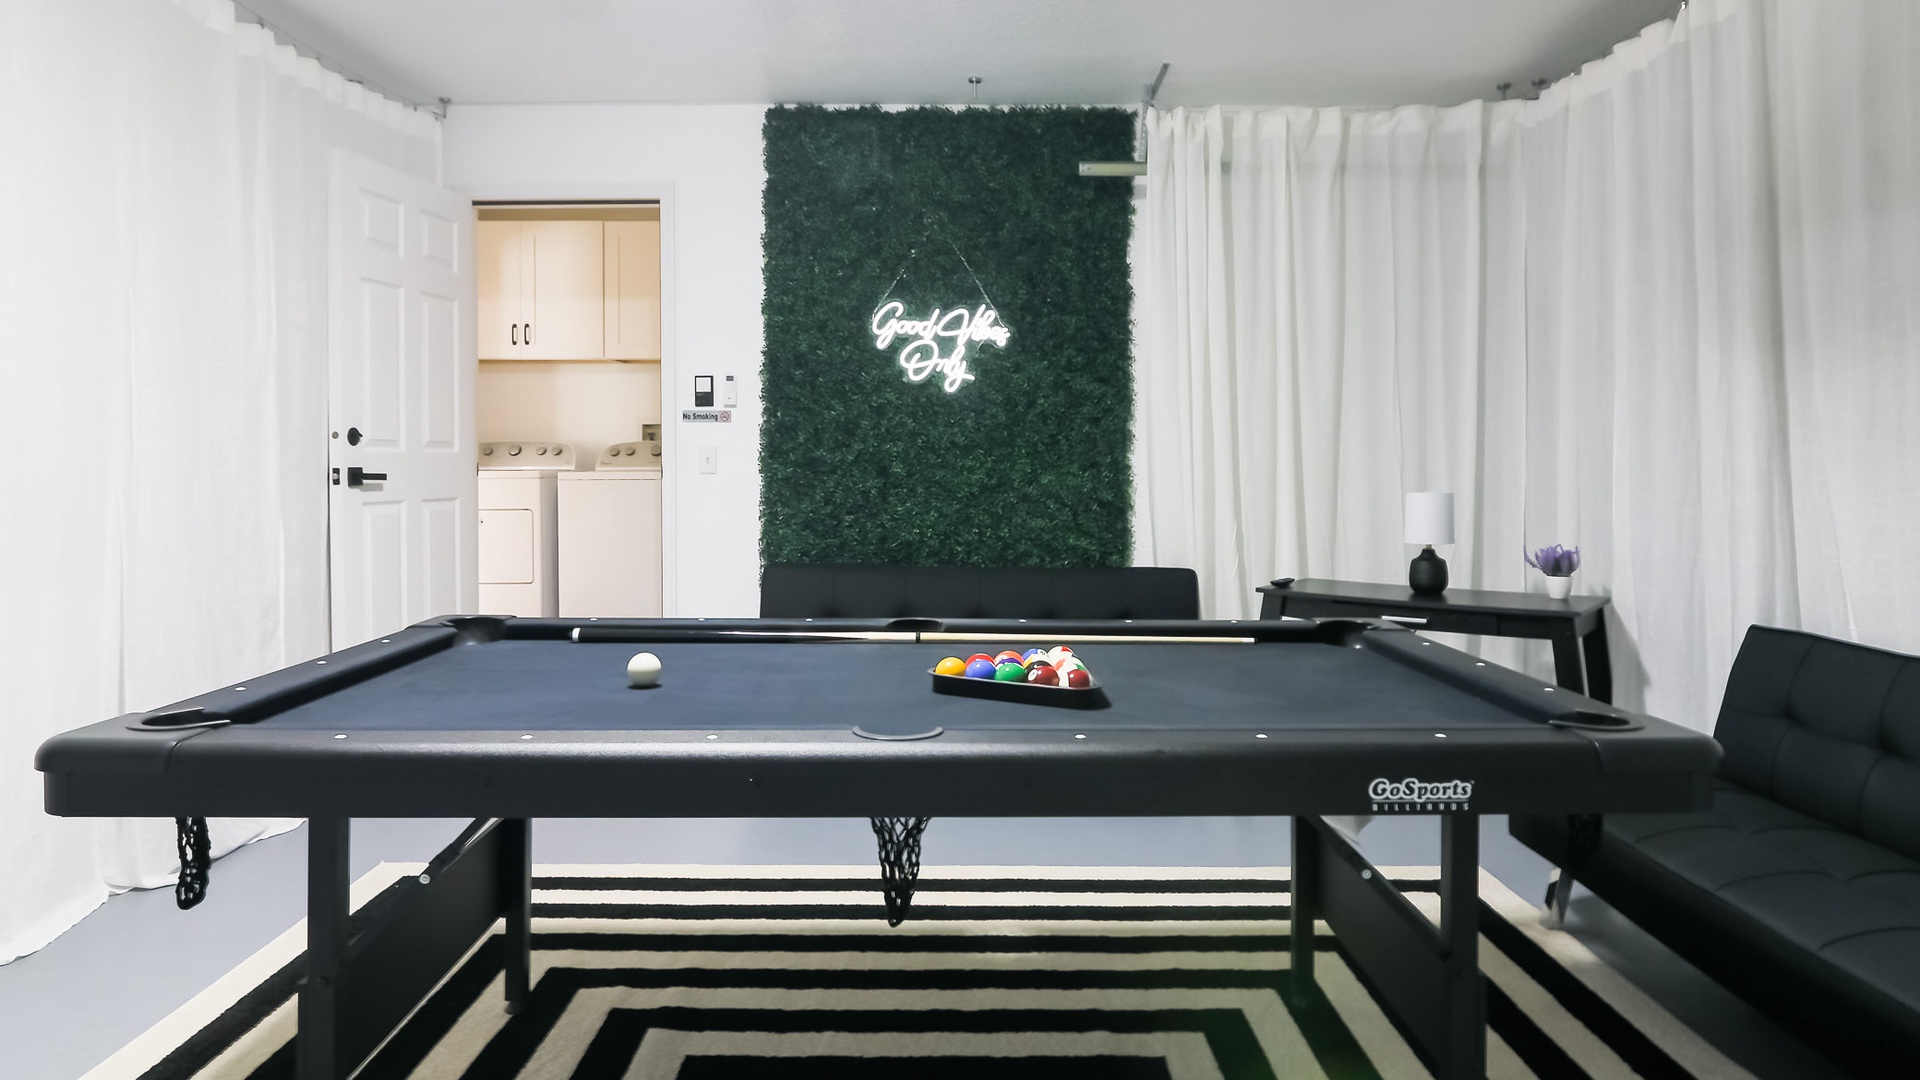 Air conditioned garage transformed into game room